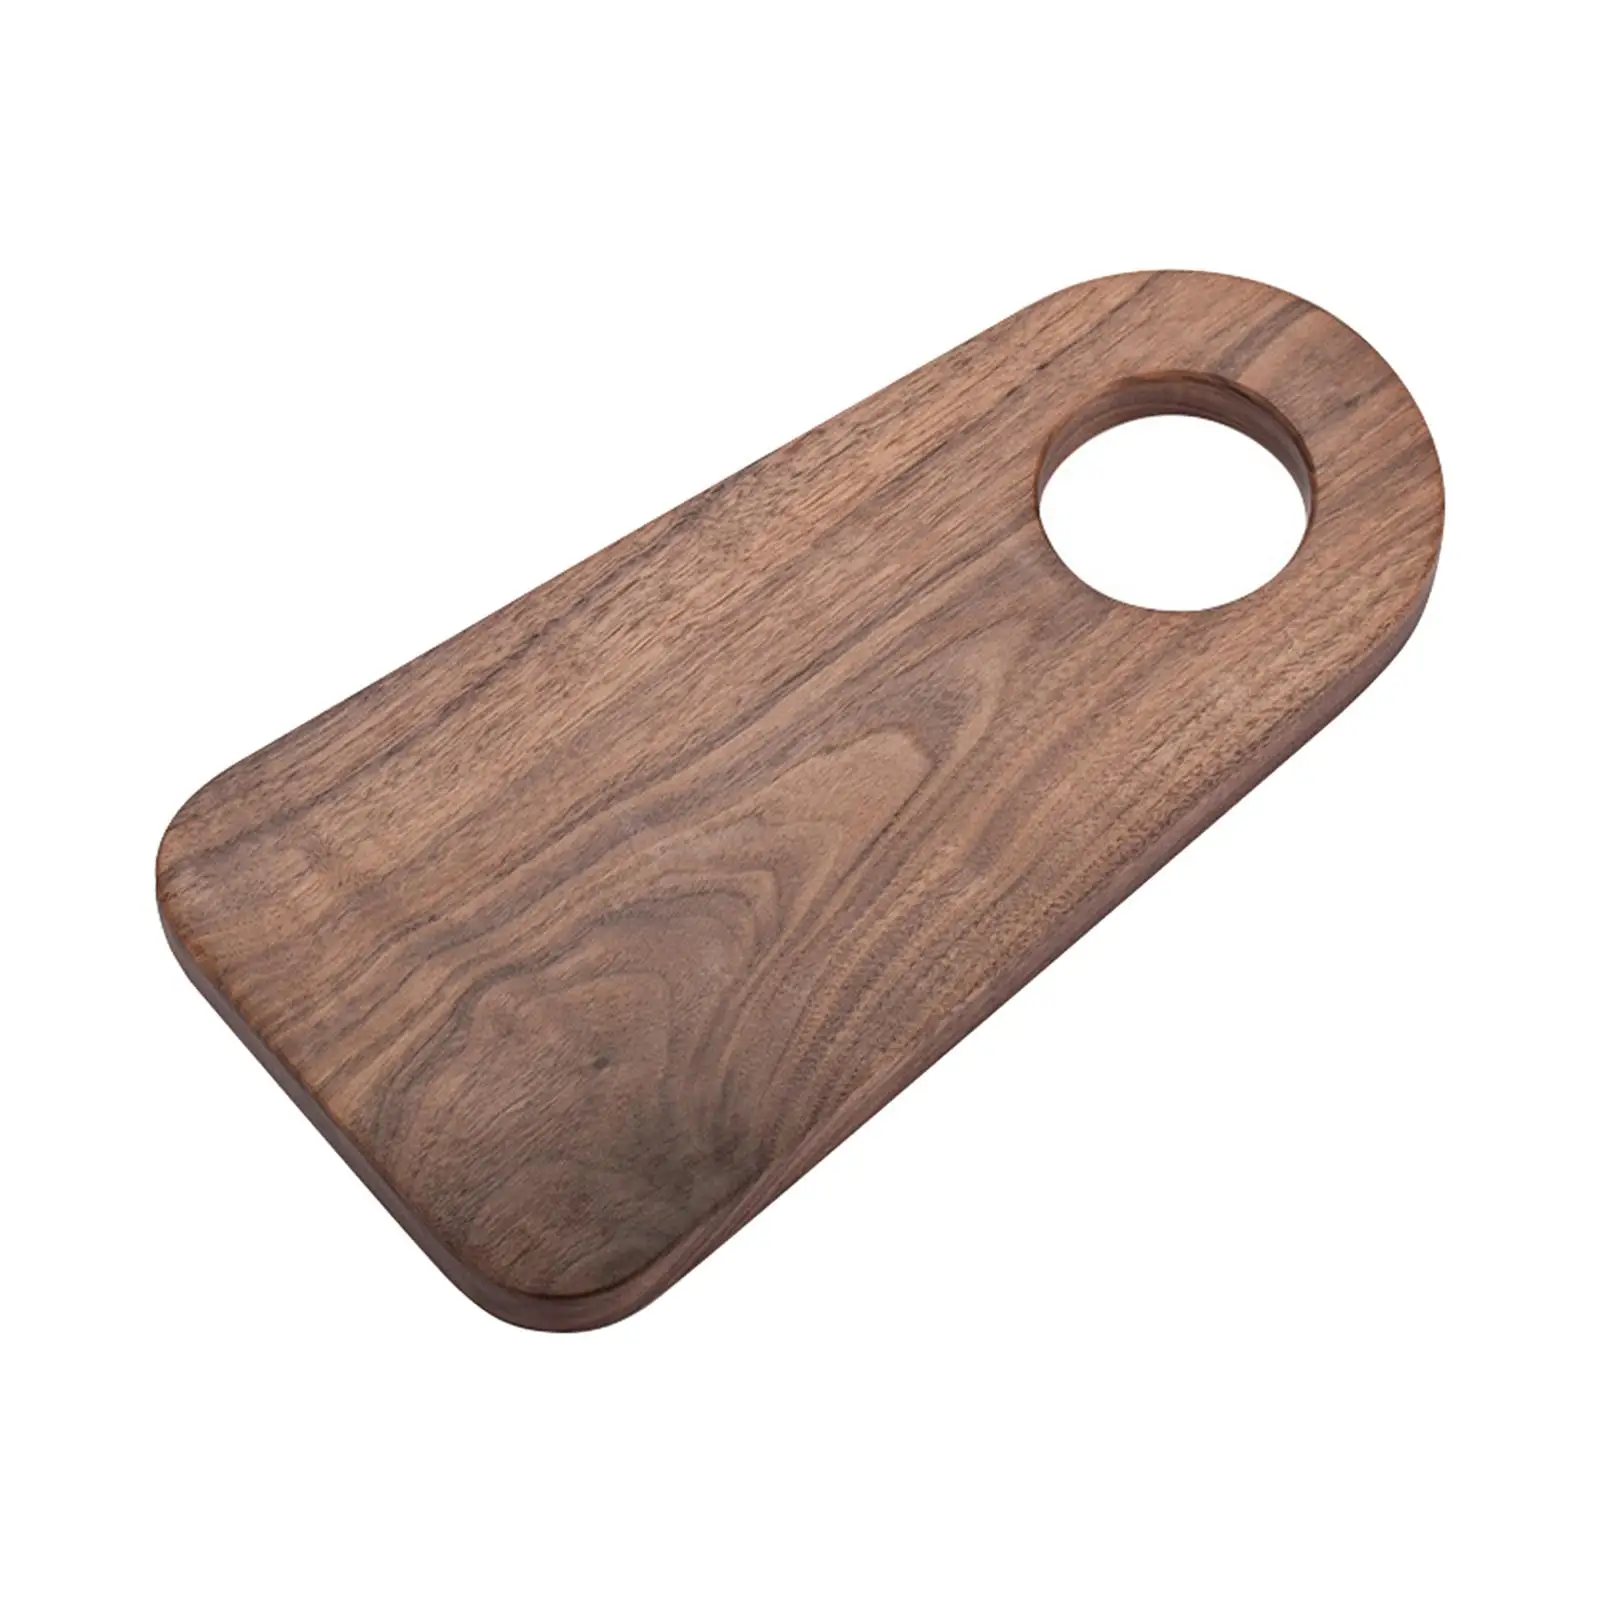 Wooden Cutting Board Kitchen Baking Tools with Handle Pizza Board Food Serving Tray Chopping Board for Steak Meat Fruits Pizza